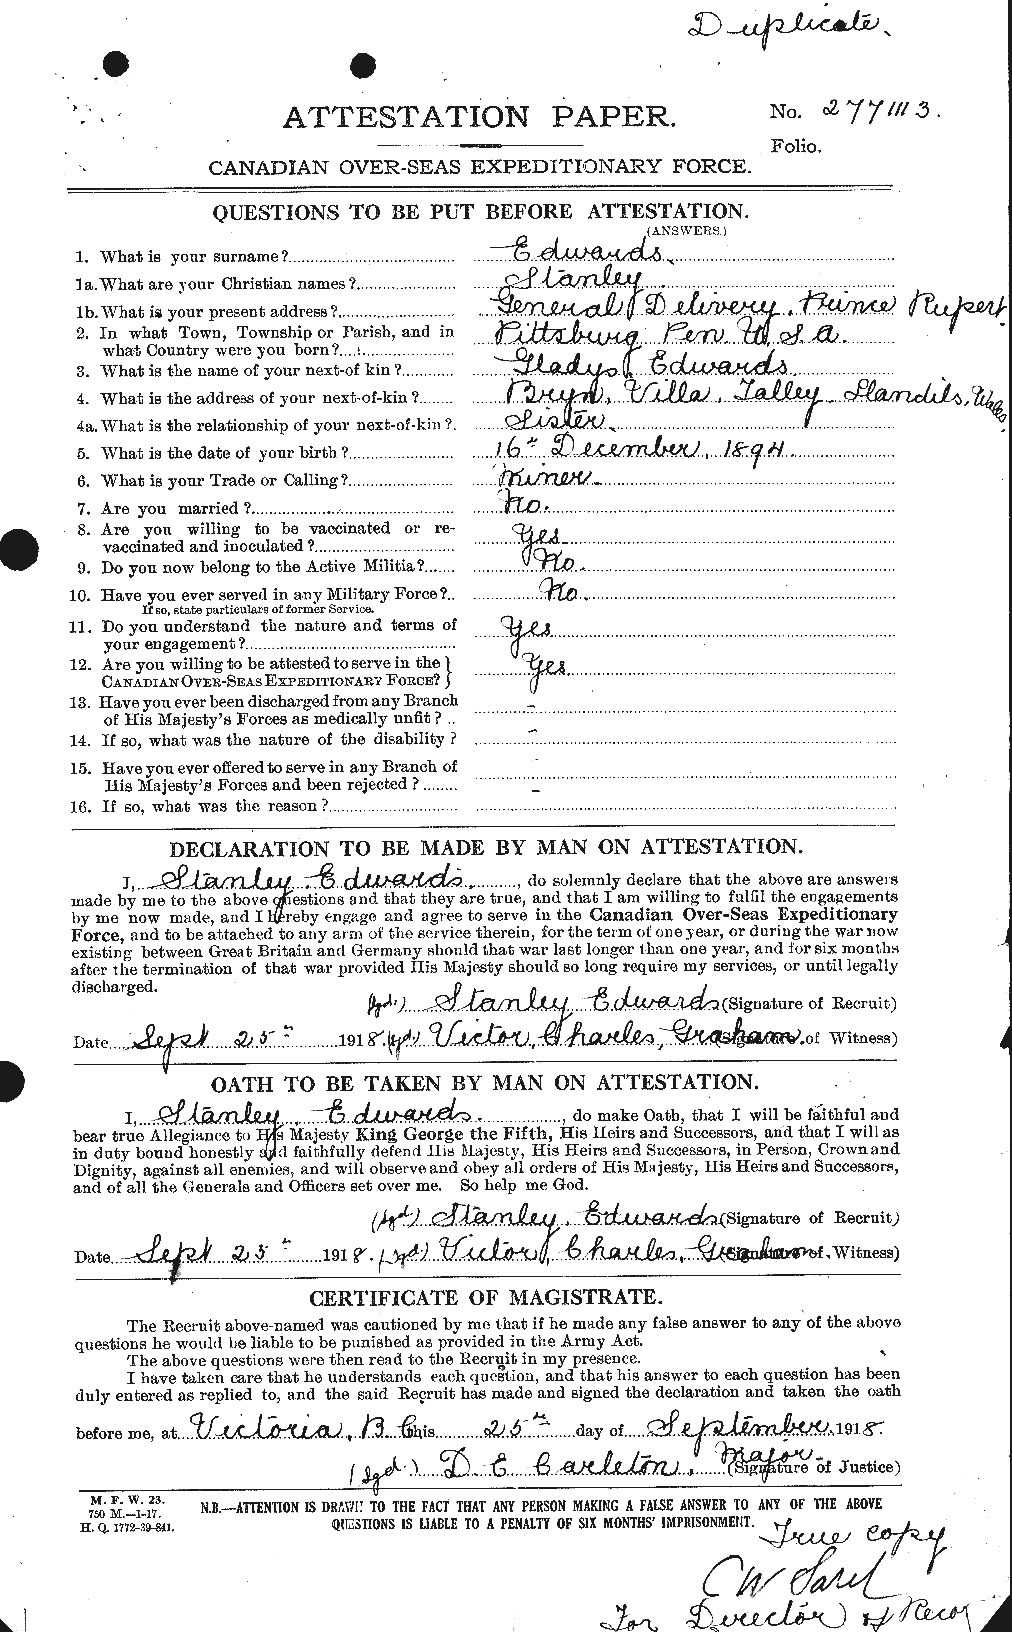 Personnel Records of the First World War - CEF 310316a